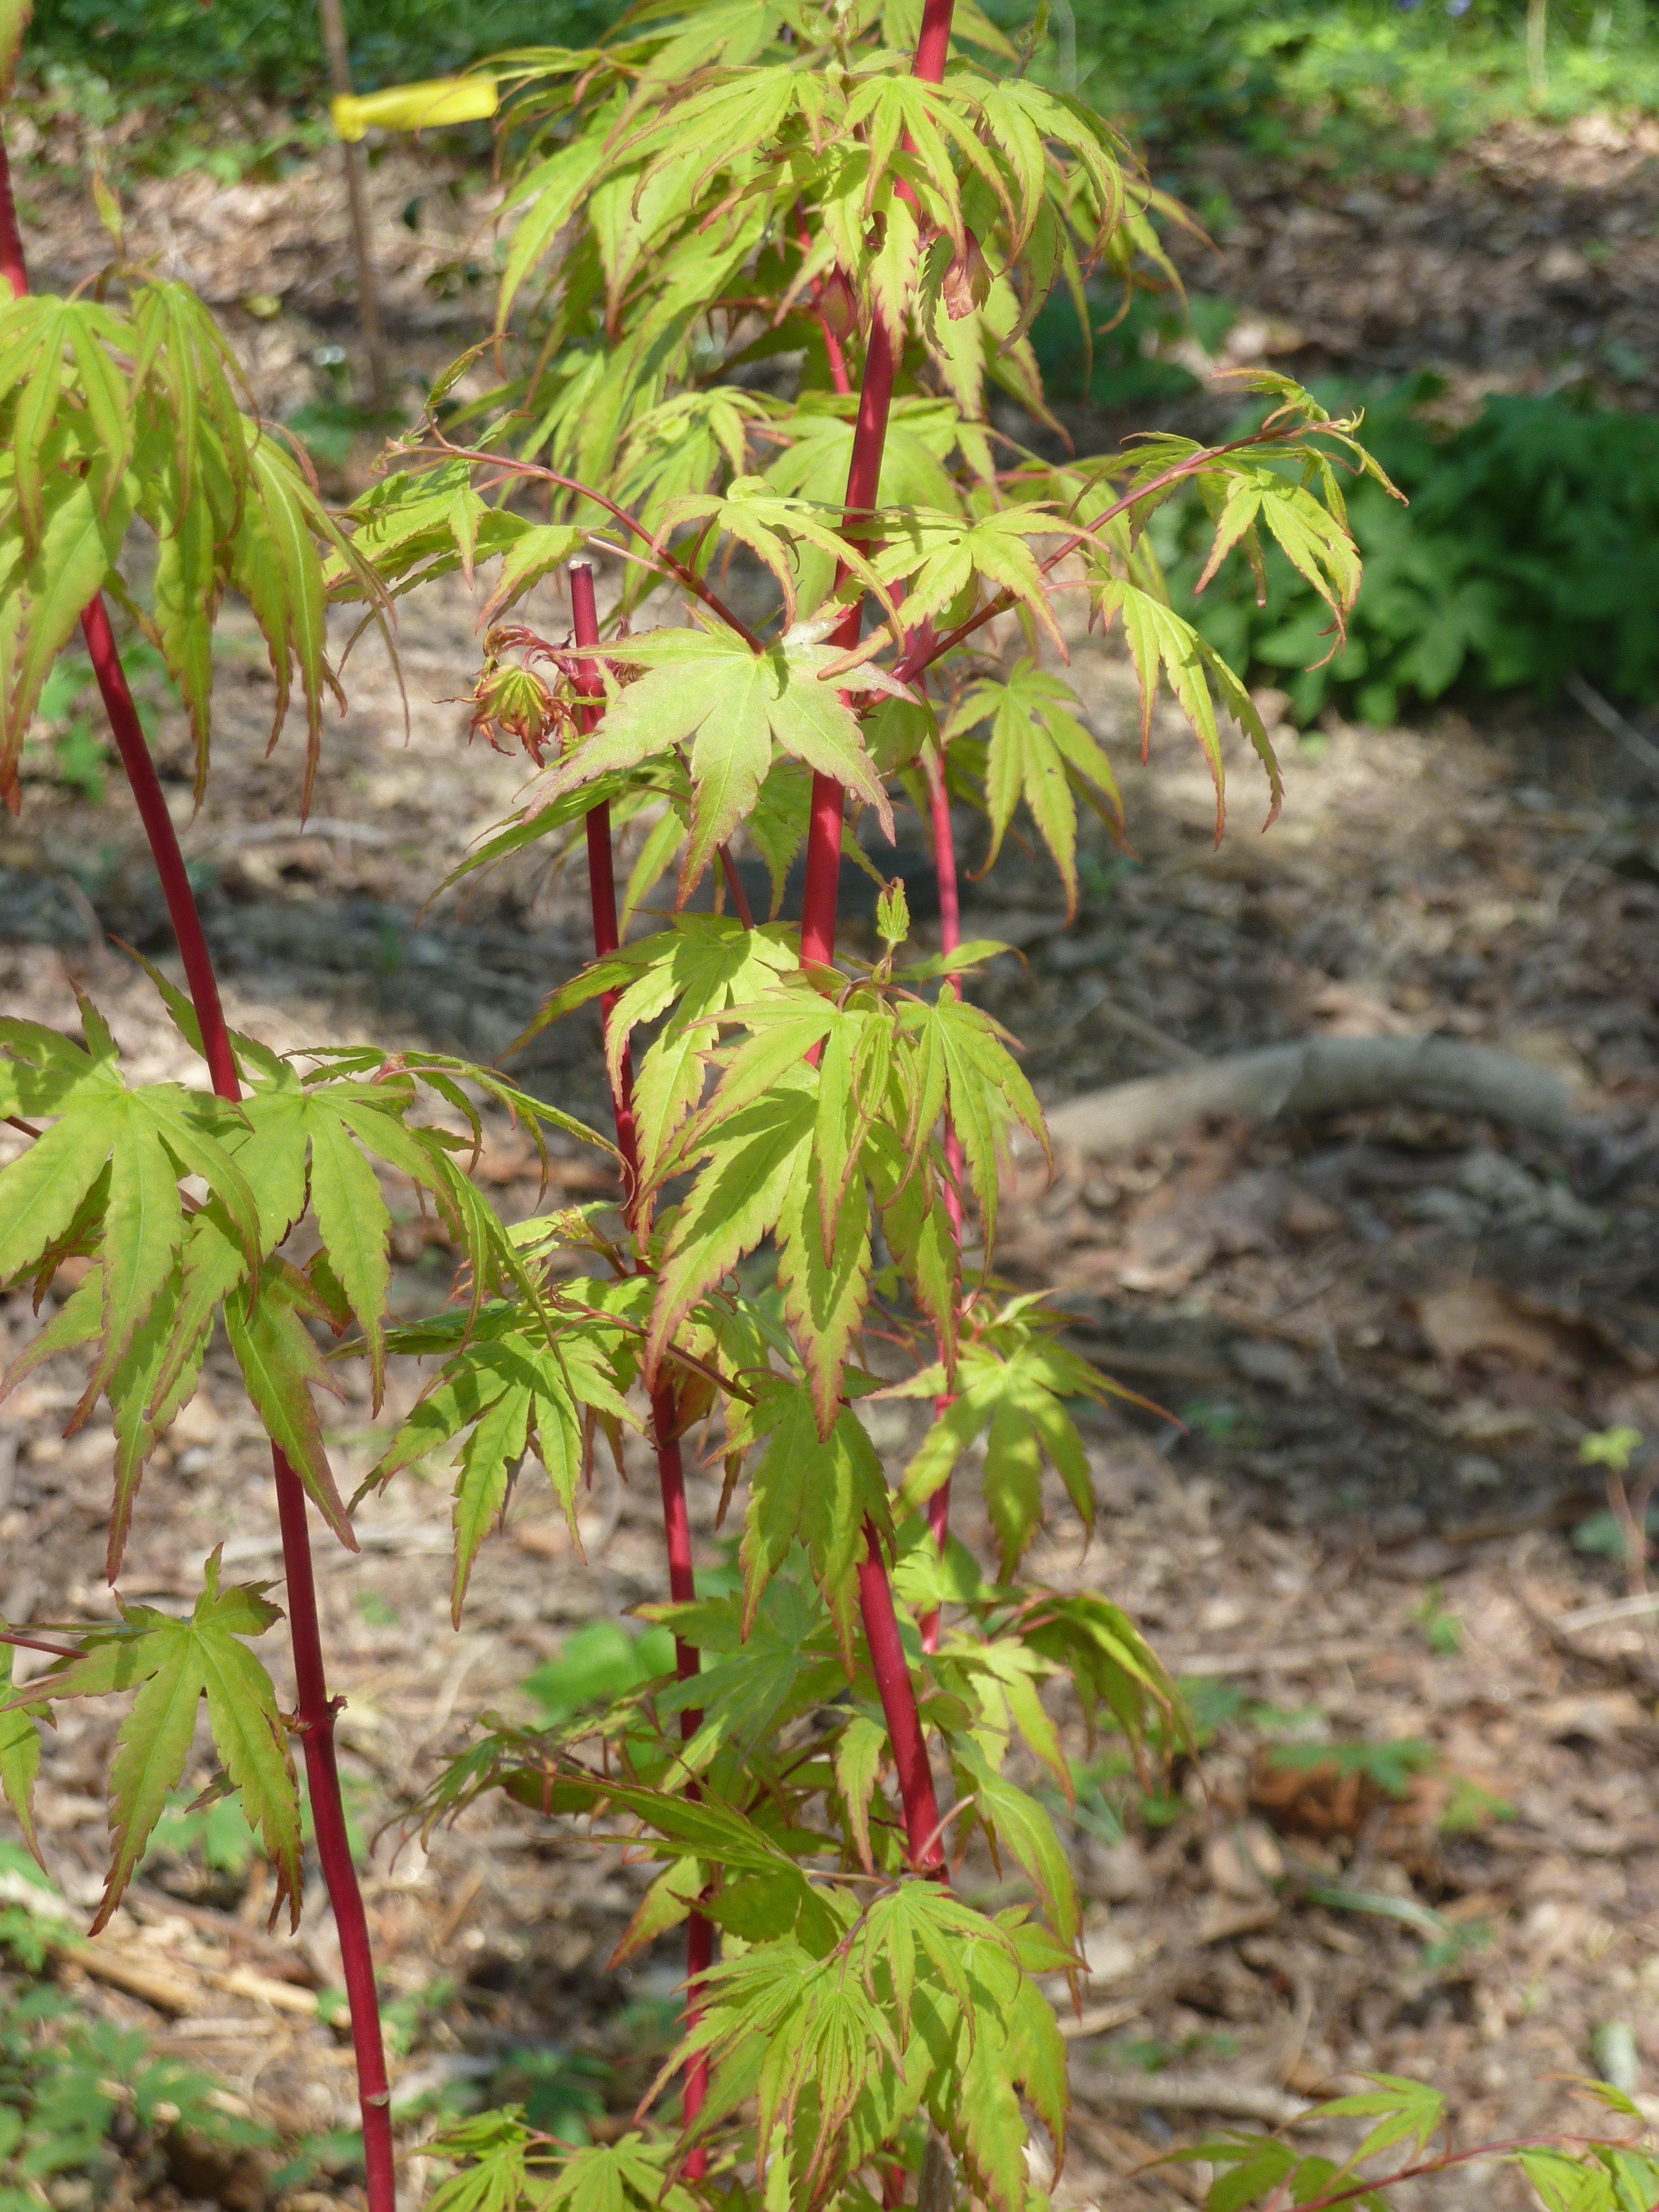 pink-green leaves with dark-pink stems